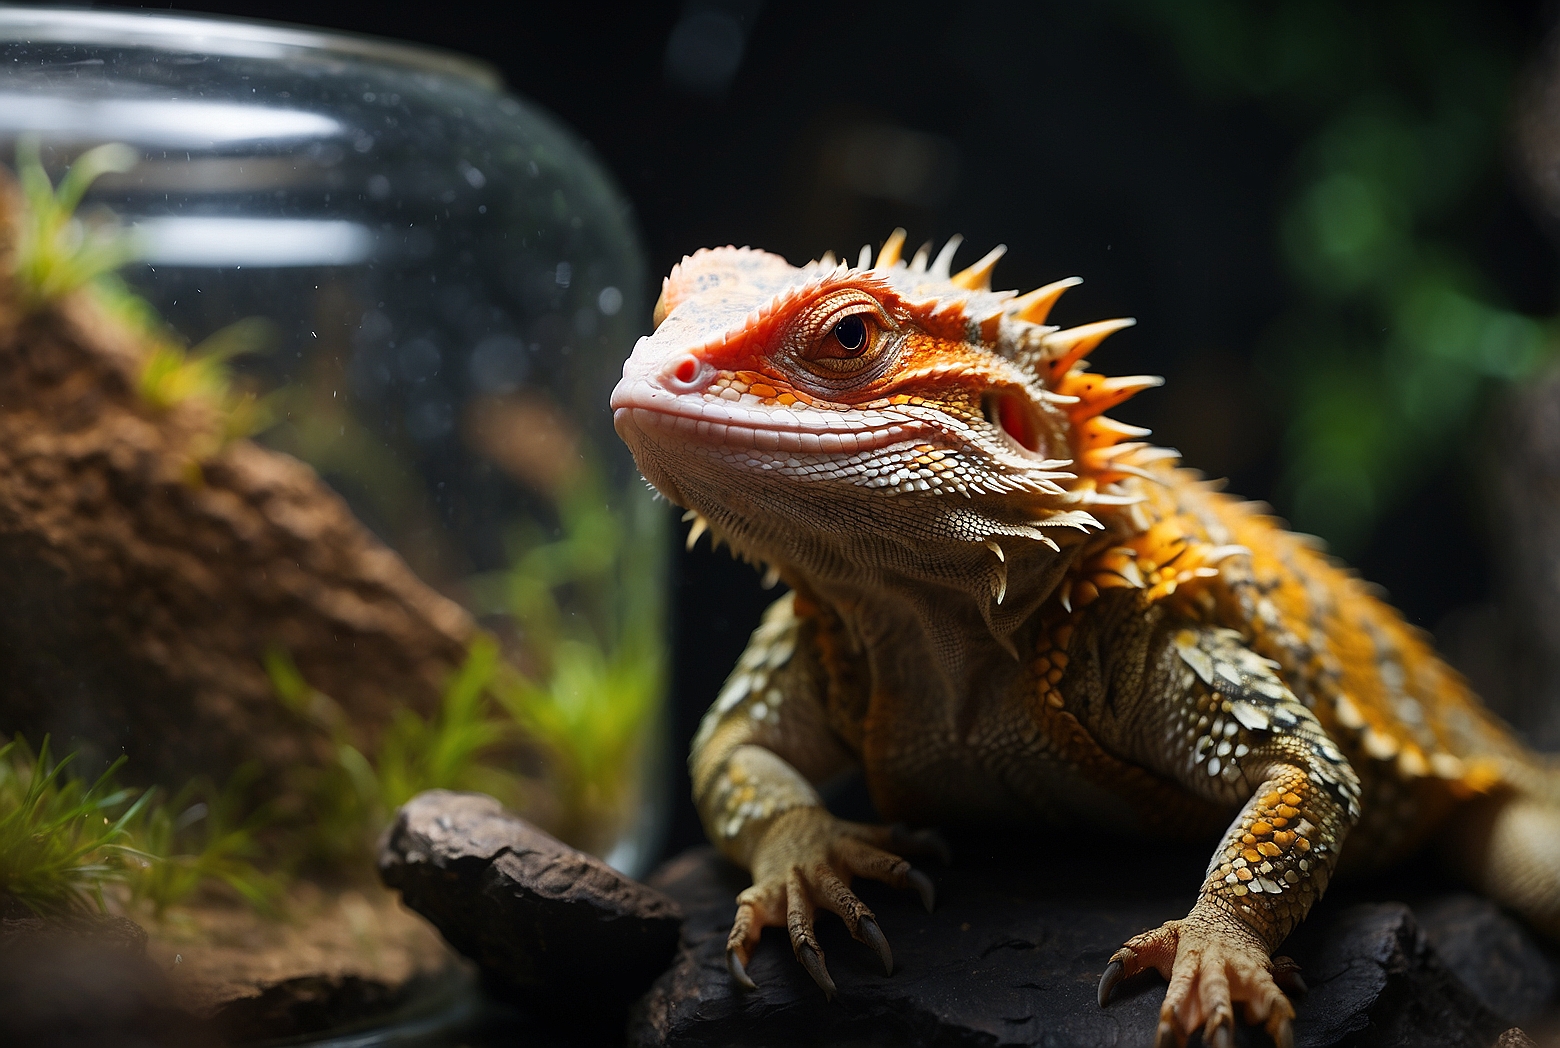 Can A Bearded Dragon Stay In A 20 Gallon Tank?